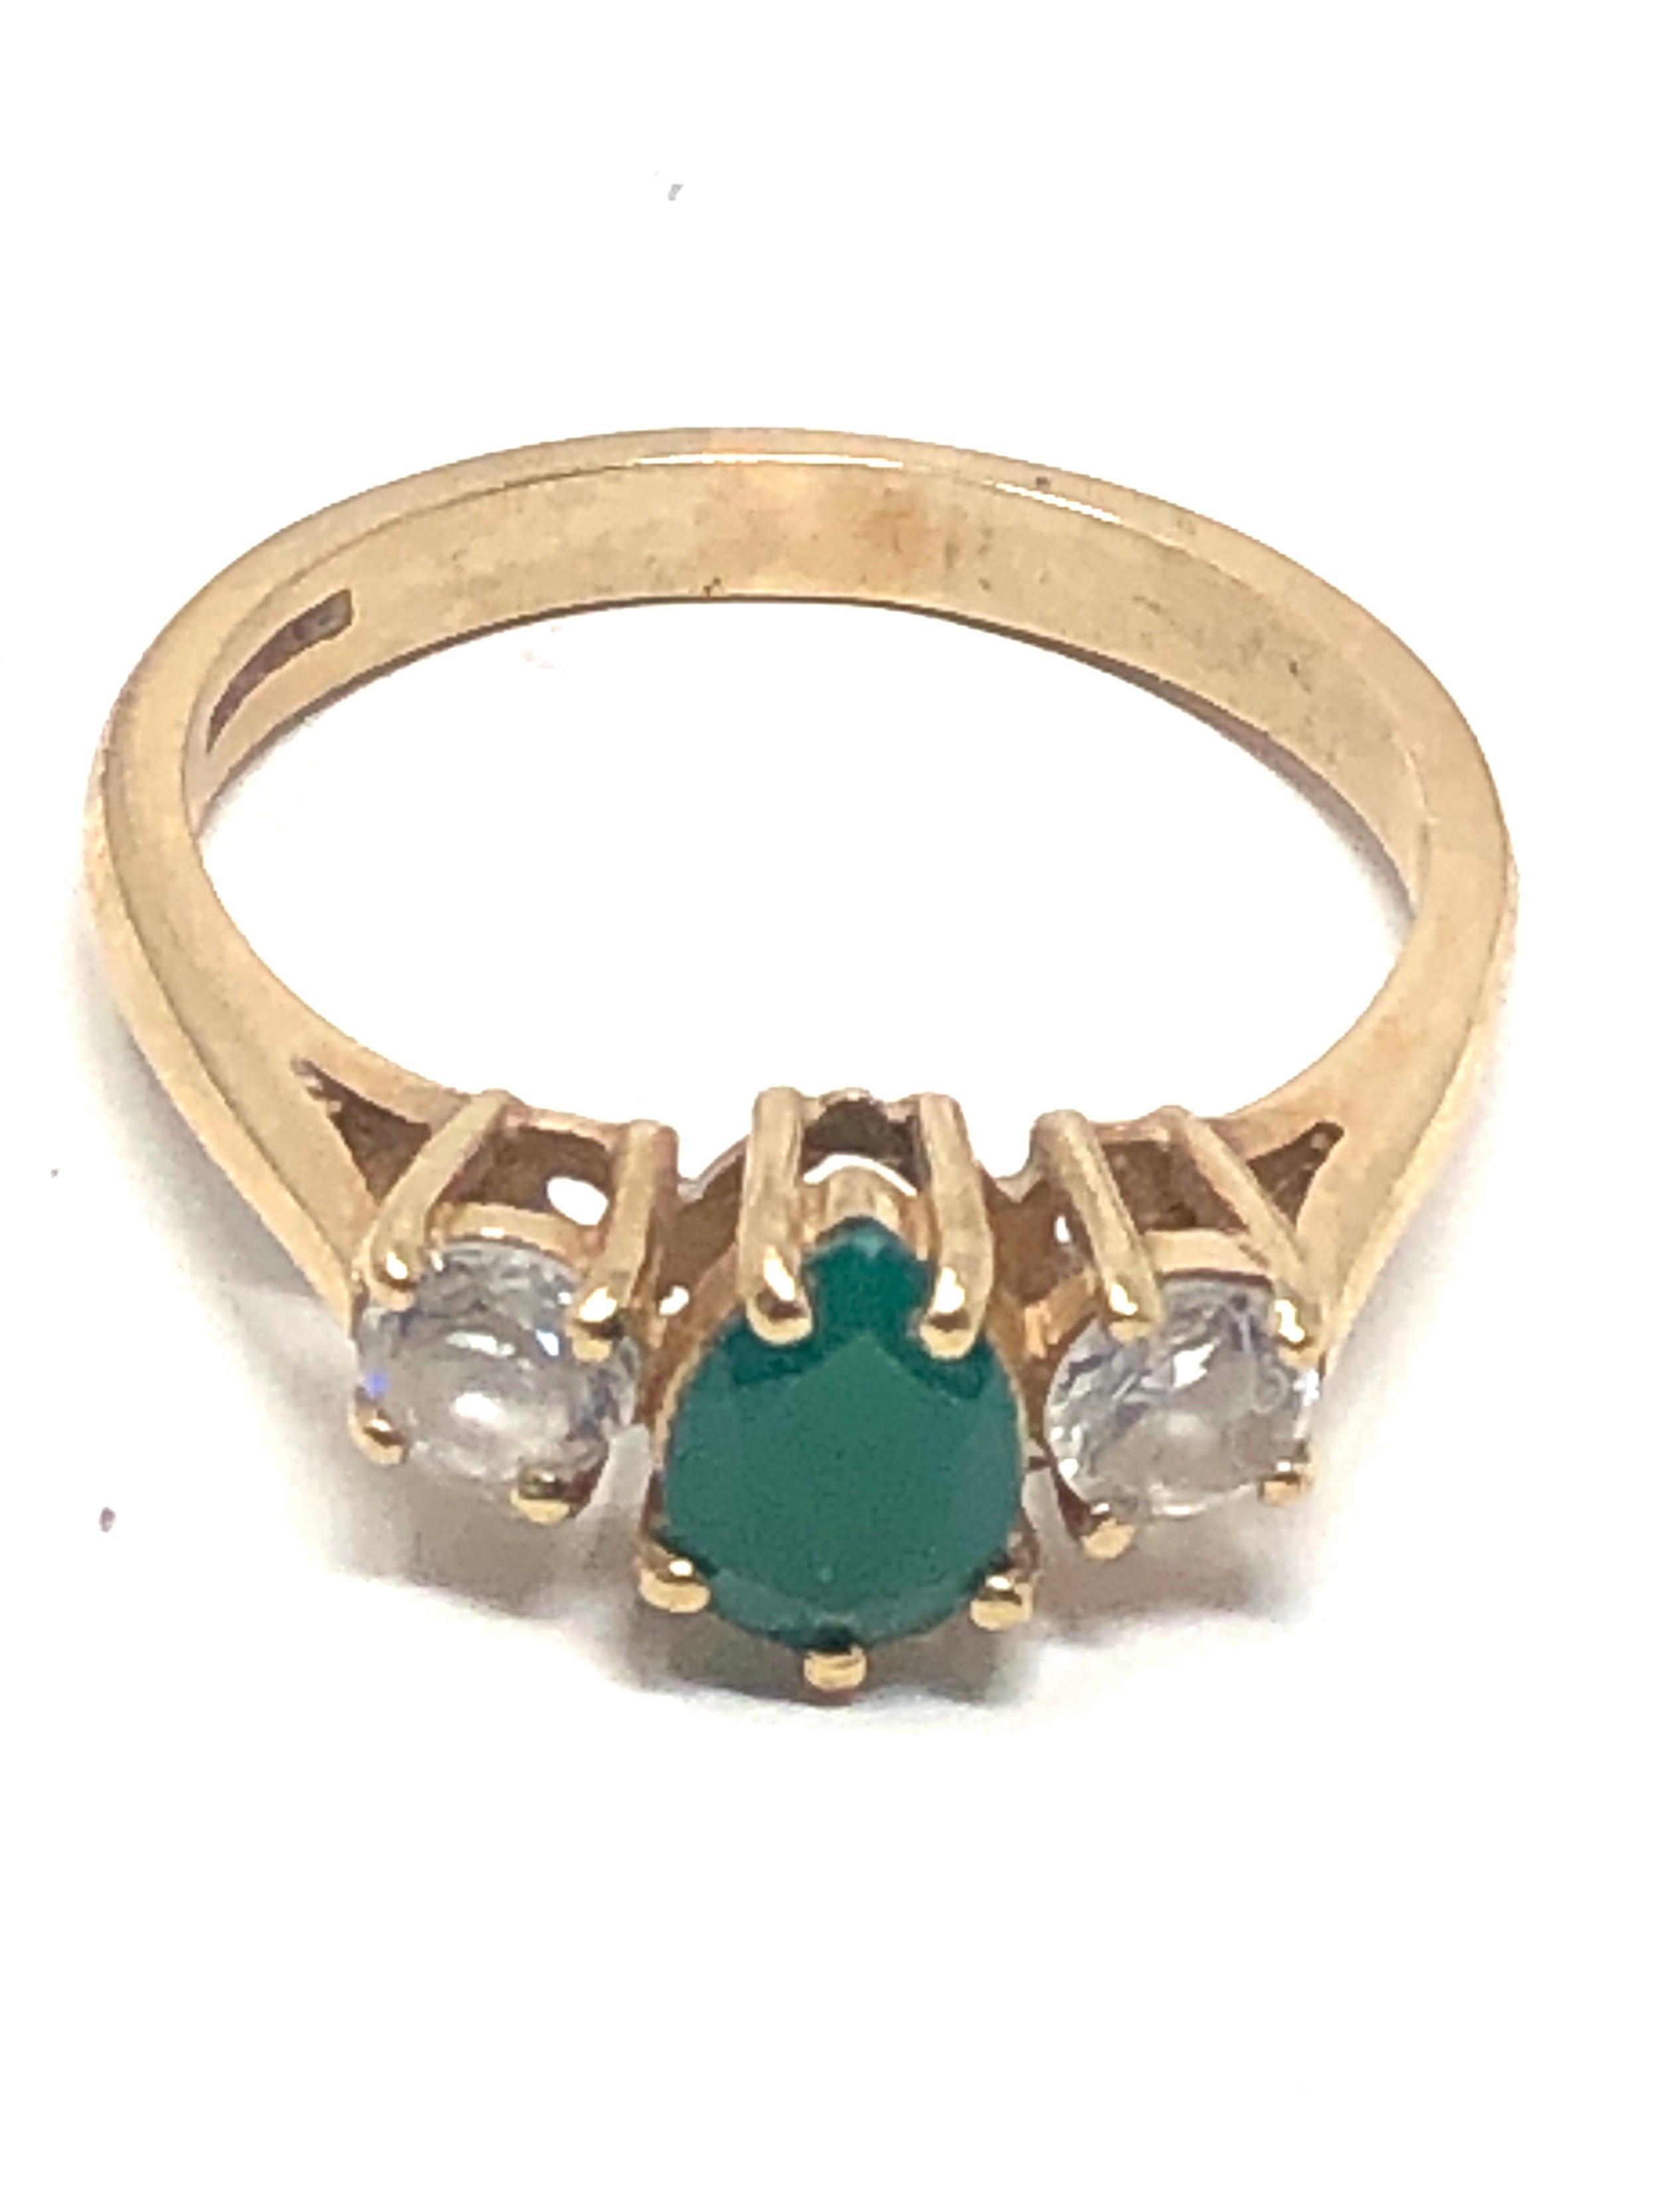 9ct gold chrysoprase & clear stone ring (3.5g)